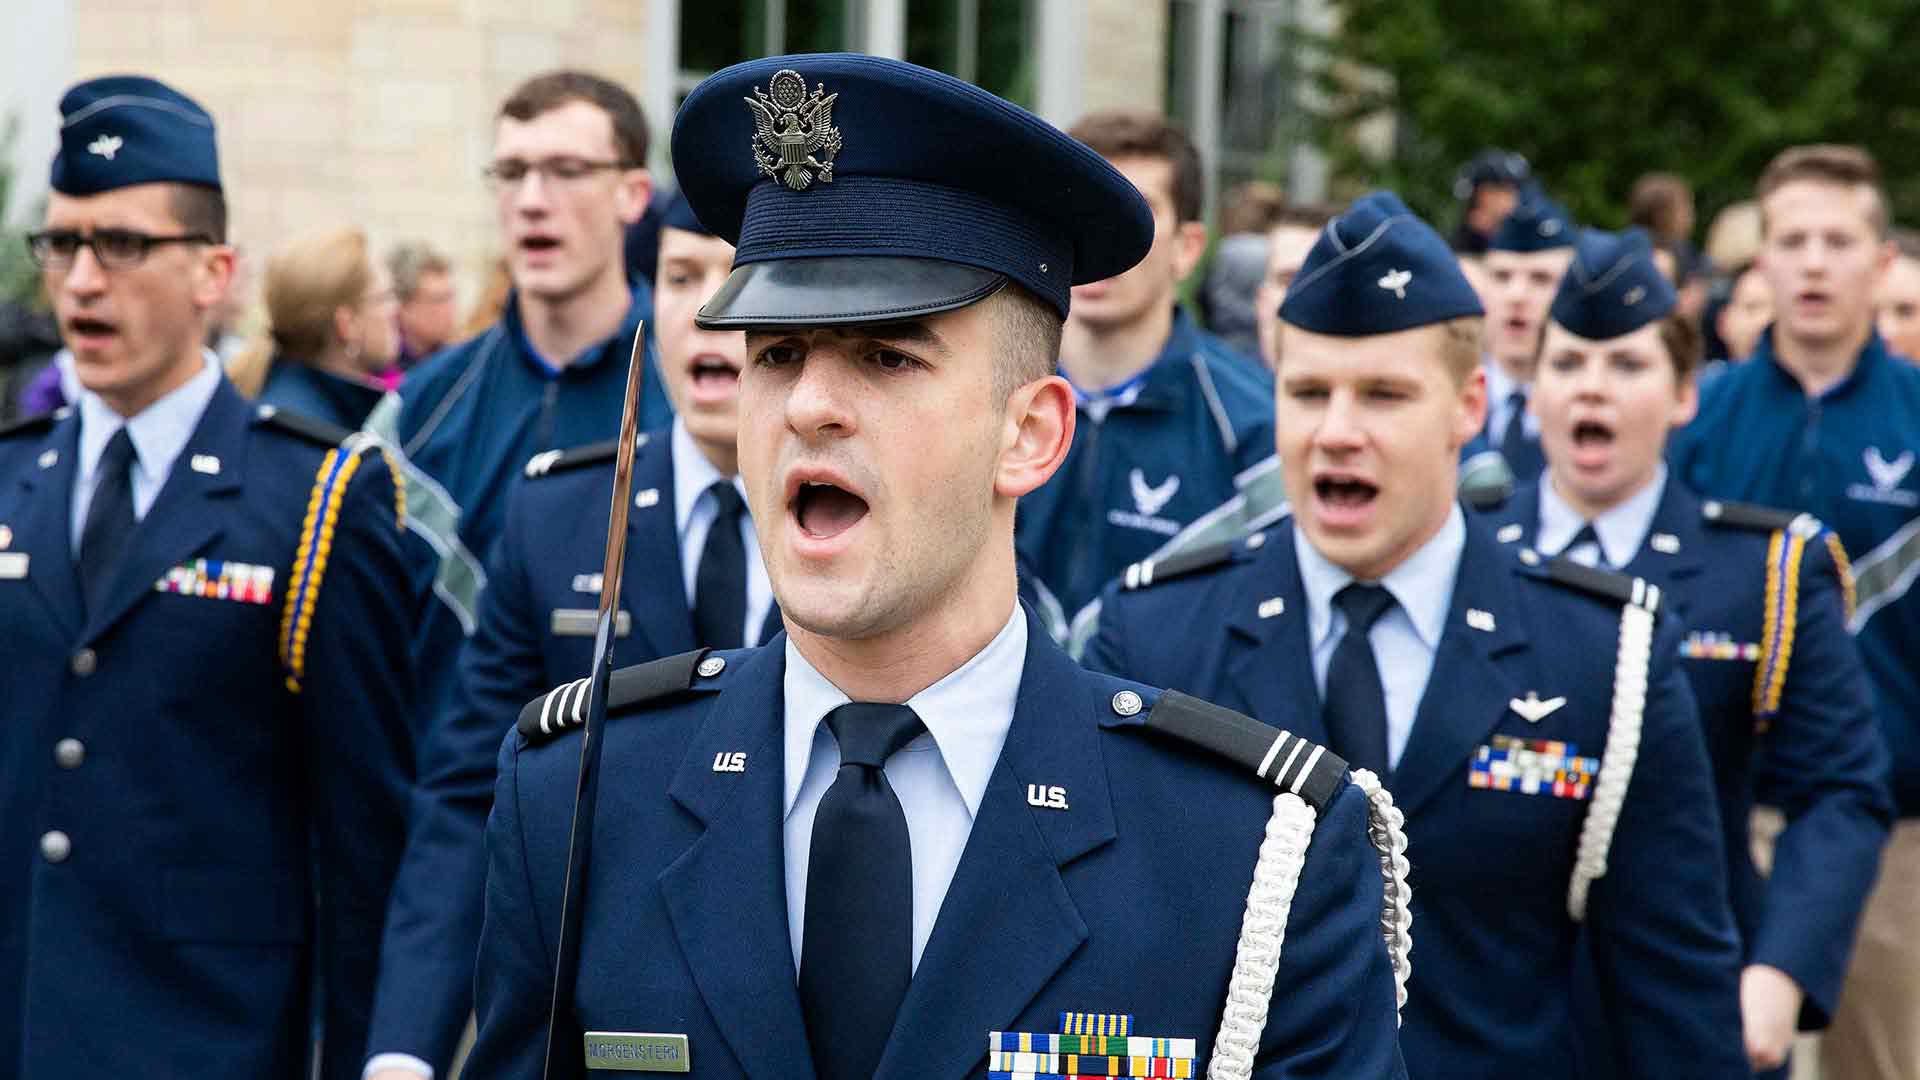 Cadets marching and shouting cadence while in formation during a Saint Thomas homecoming parade.